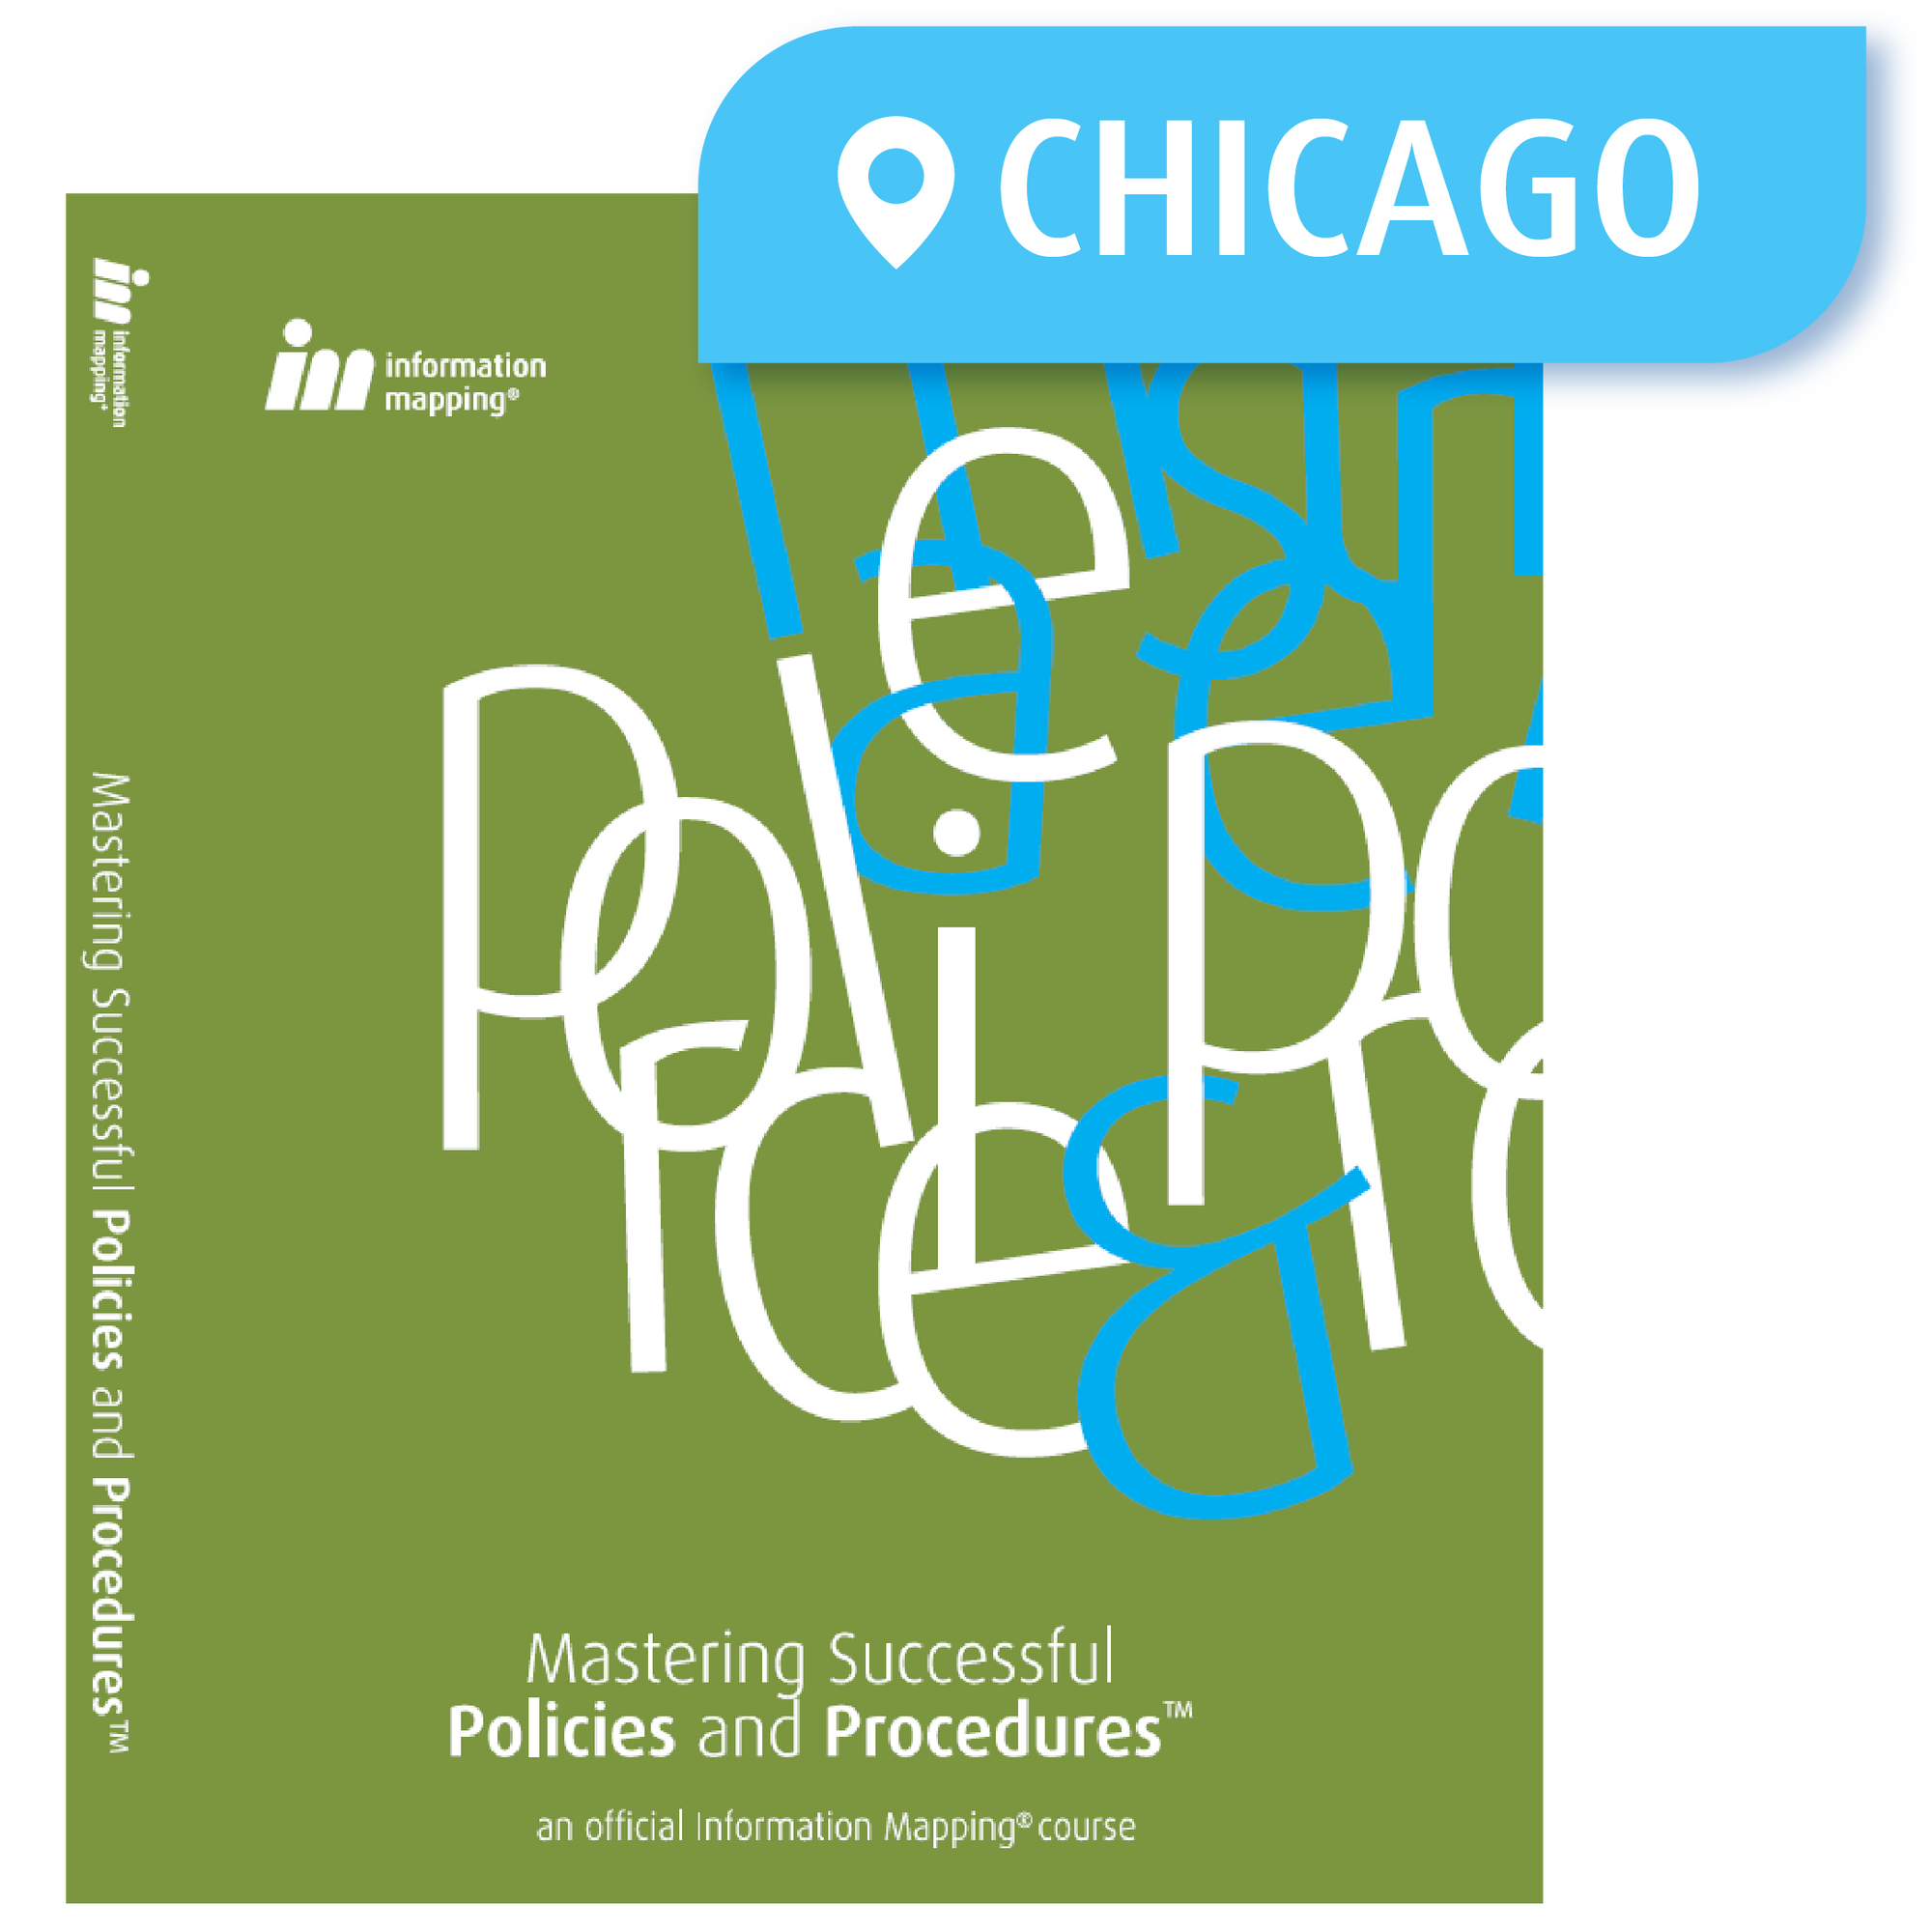 June 6-7, 2023 - In-person Public Course: Mastering Successful Policies and Procedures